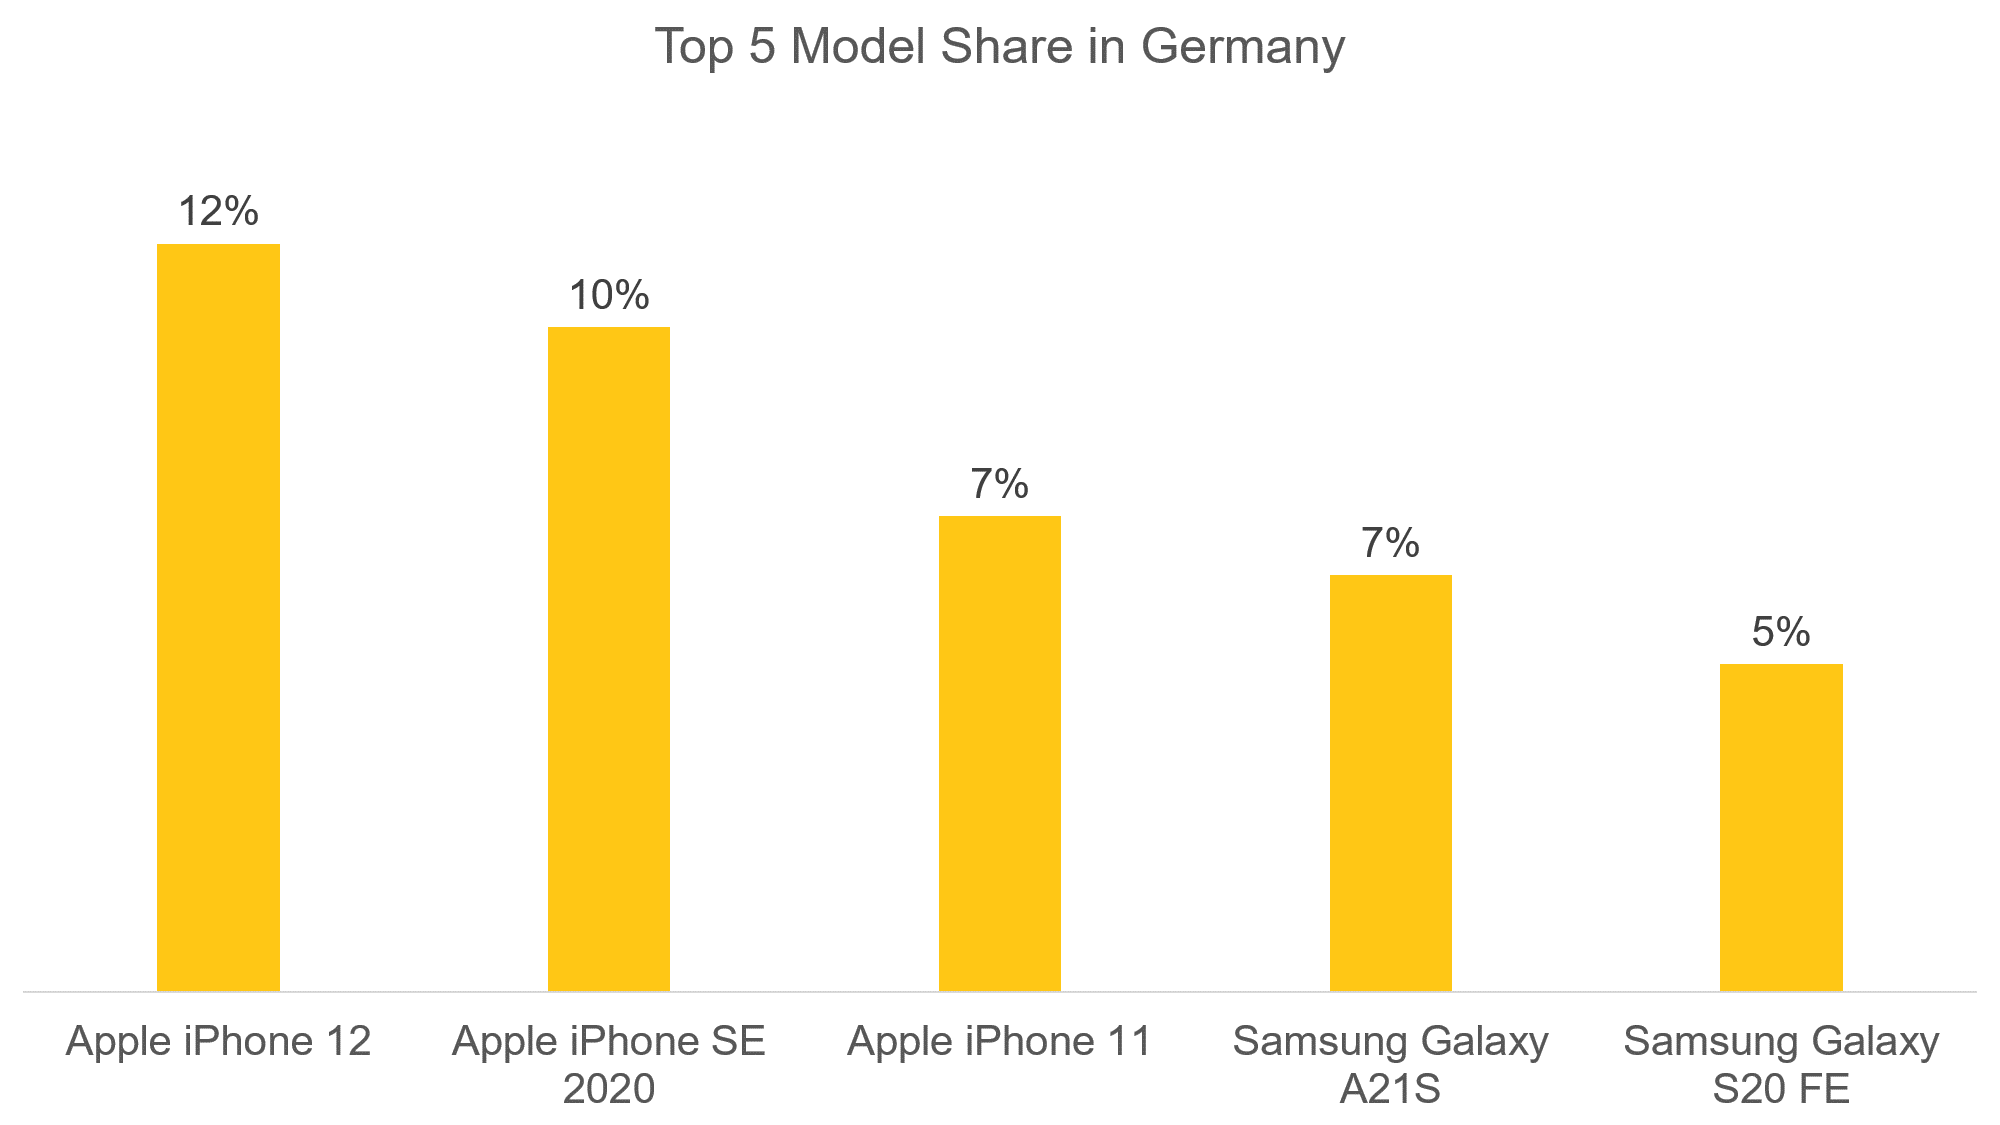 Top 5 Model Share in Germany - Oct 2020